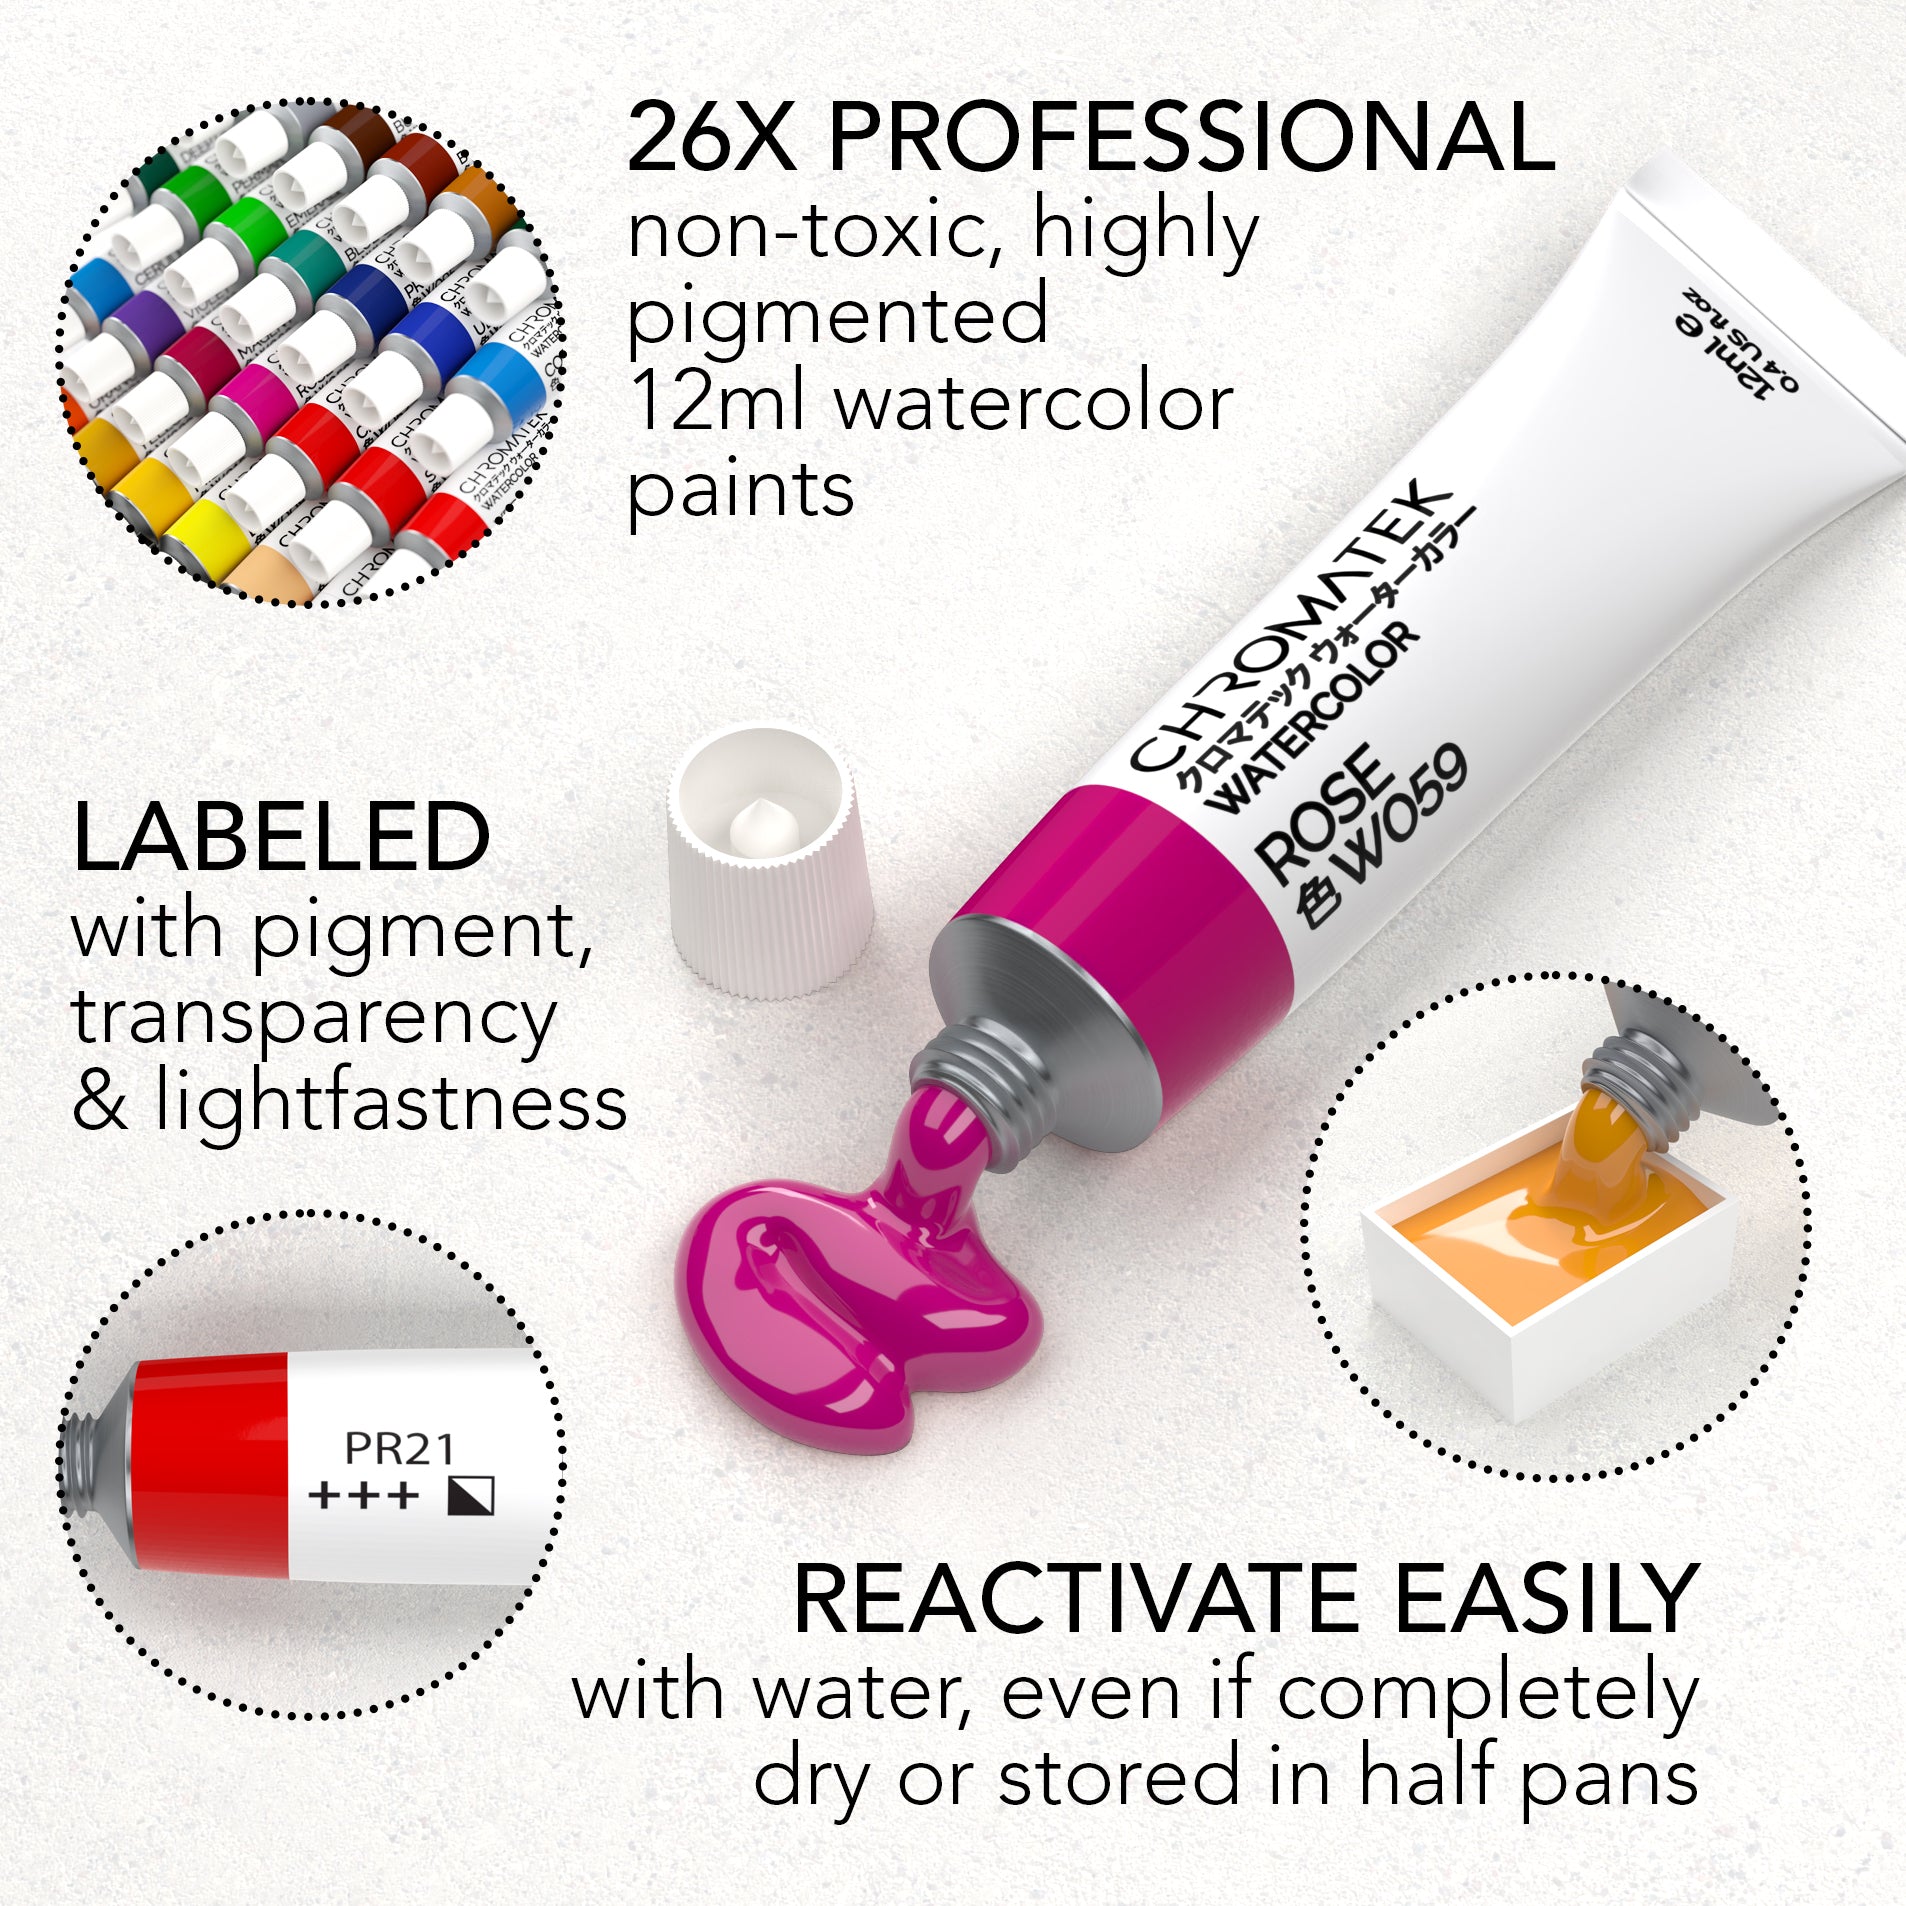 WATERCOLOR SET: 24 X 12ML TUBES, BRUSHES, PALETTE, TUTORIAL PAD AND VIDEO SERIES